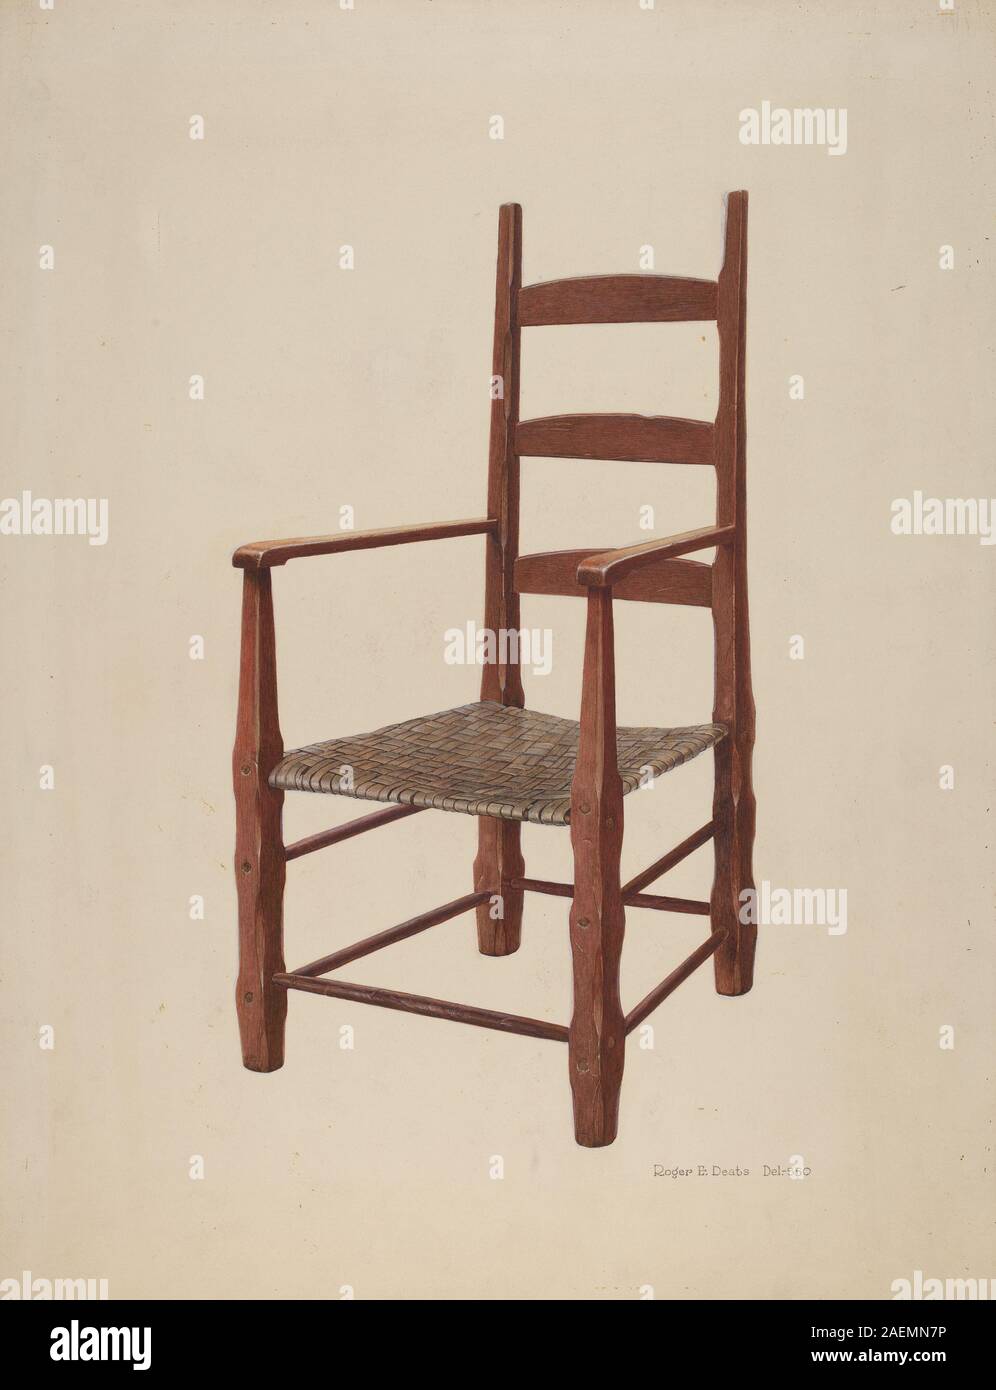 Roger Deats, Ladder Back Chair, c 1939, Ladder Back Chair; circa 1939  date Stock Photo